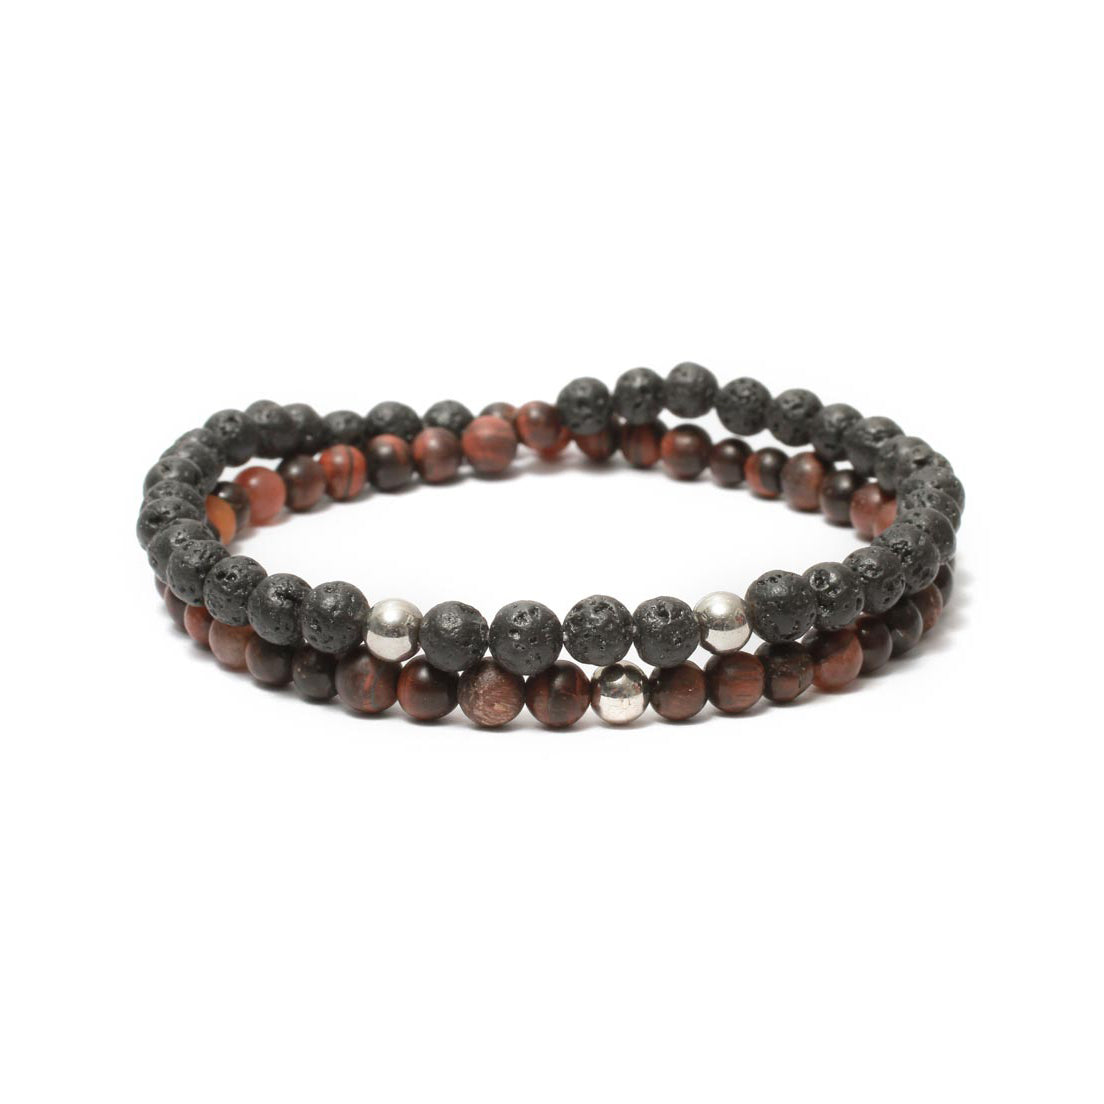 Two Layer Wrap Bracelet in Red Tiger Eye & Lava Gemstone Beads